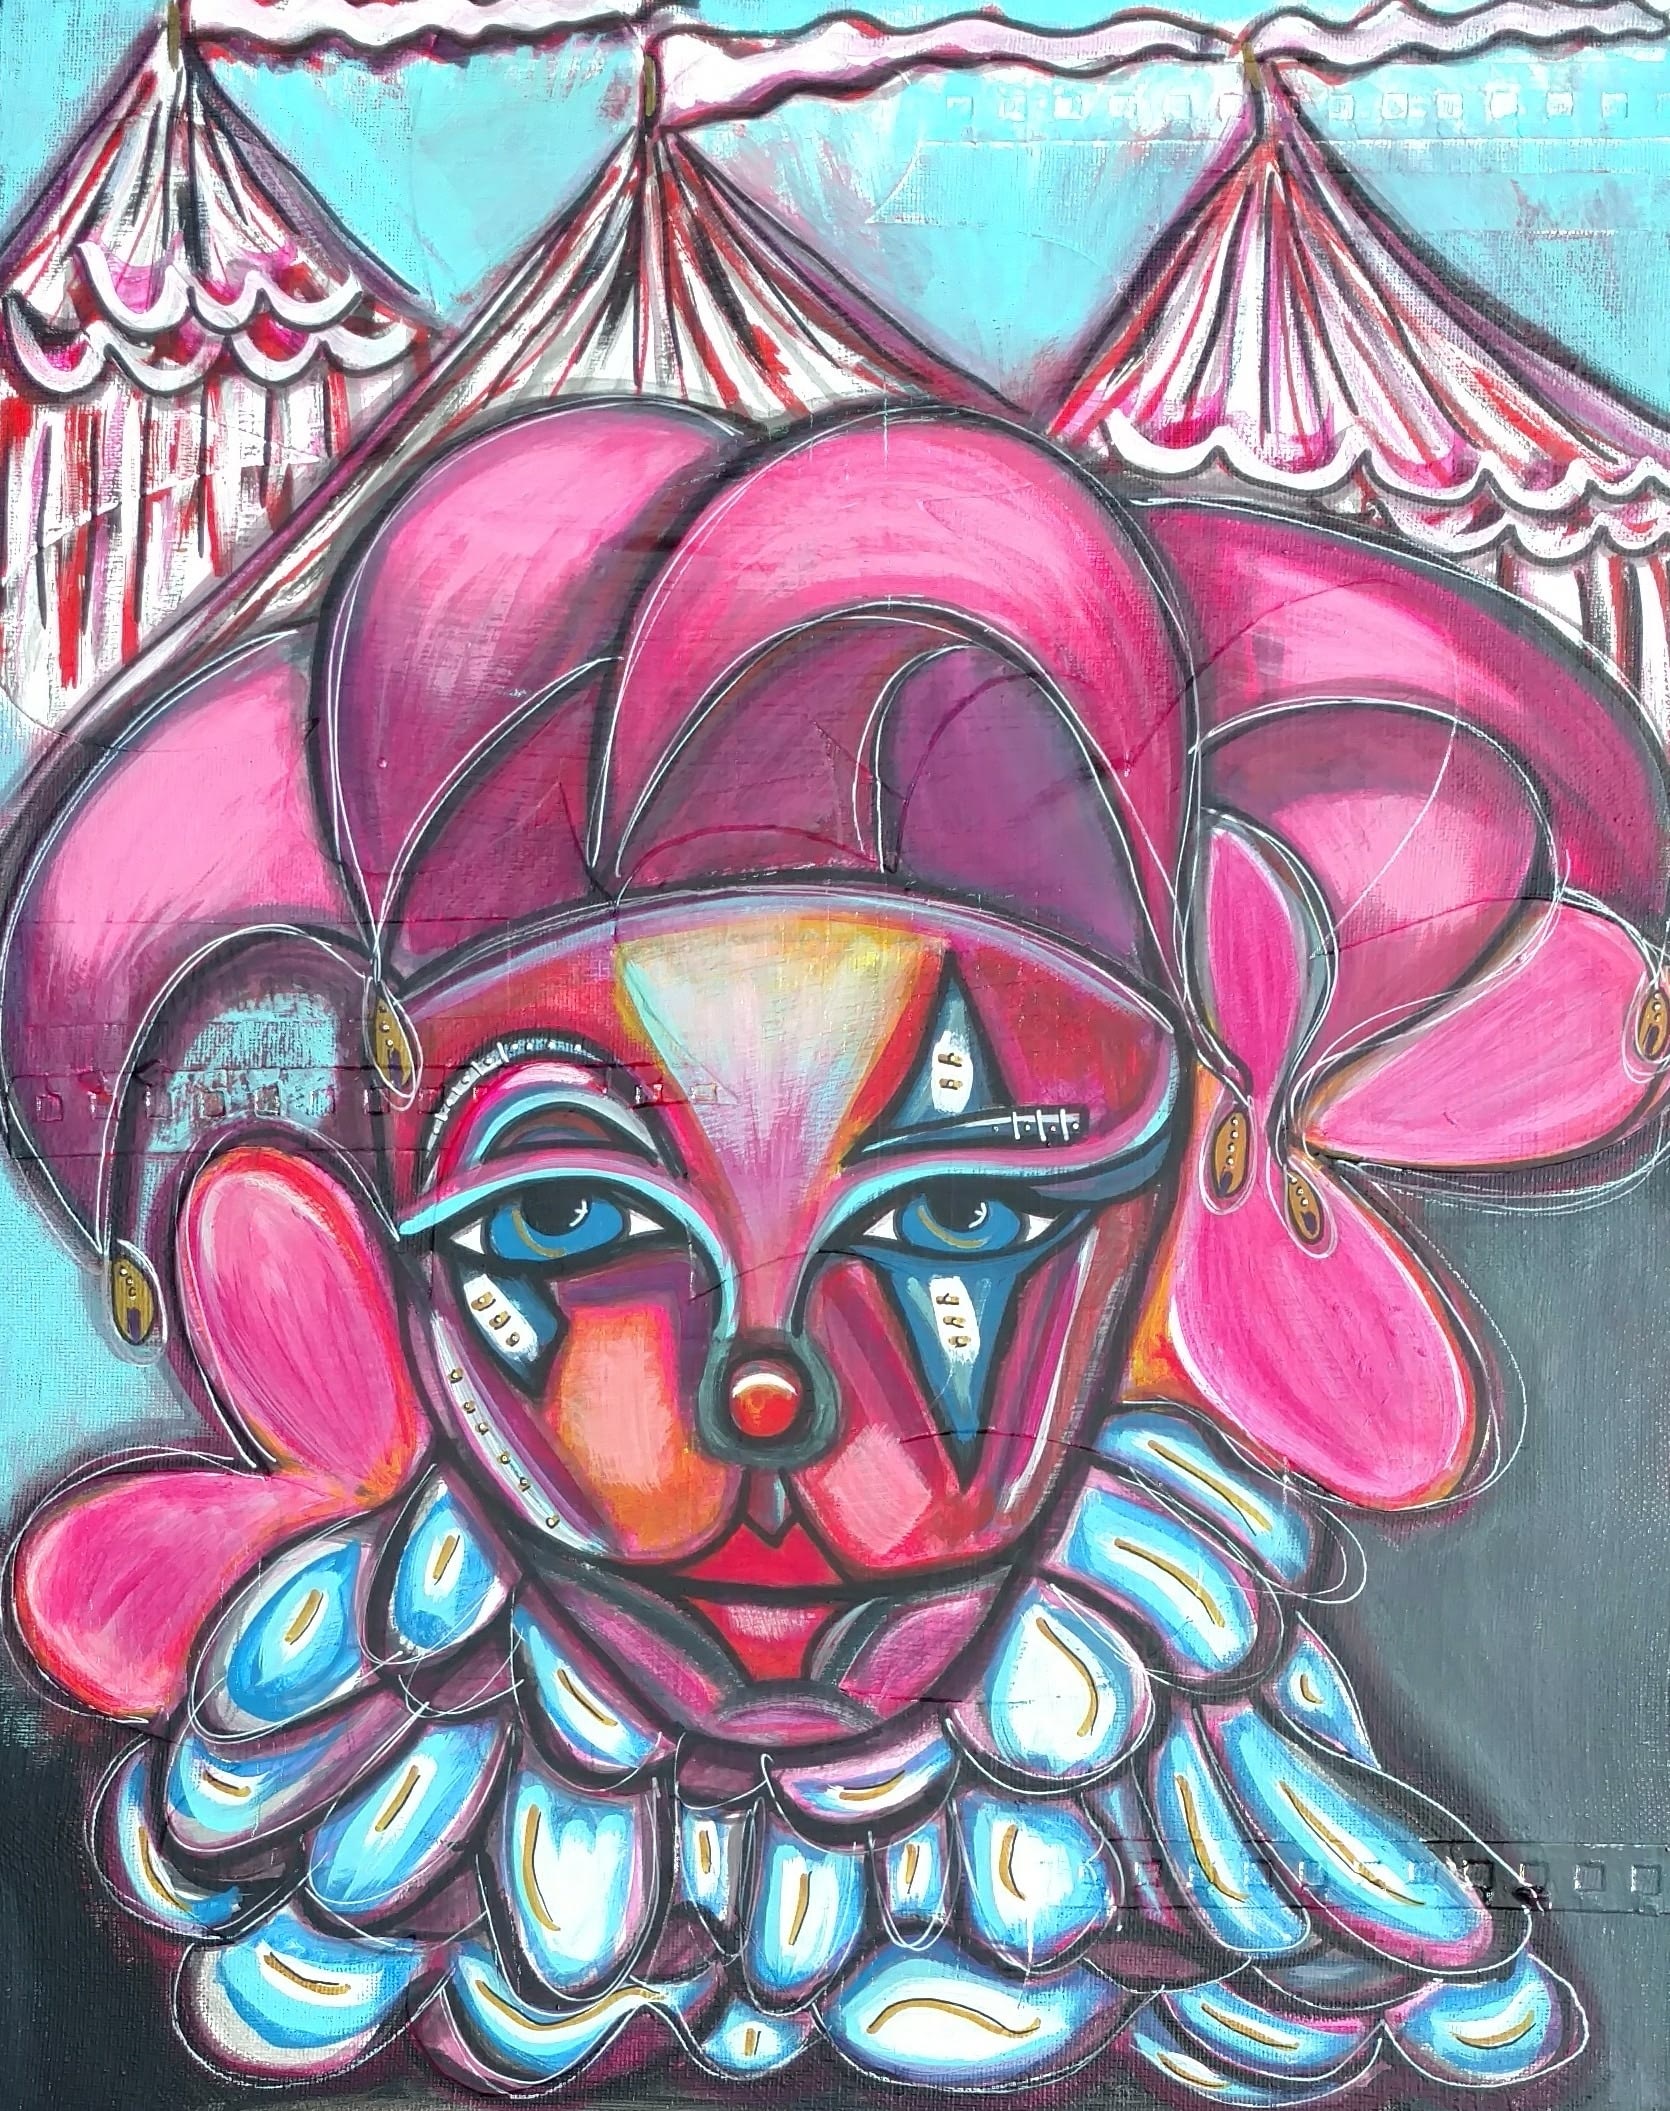 clown wearng a pink hat and white ruffles standing in front of 3 circus tents